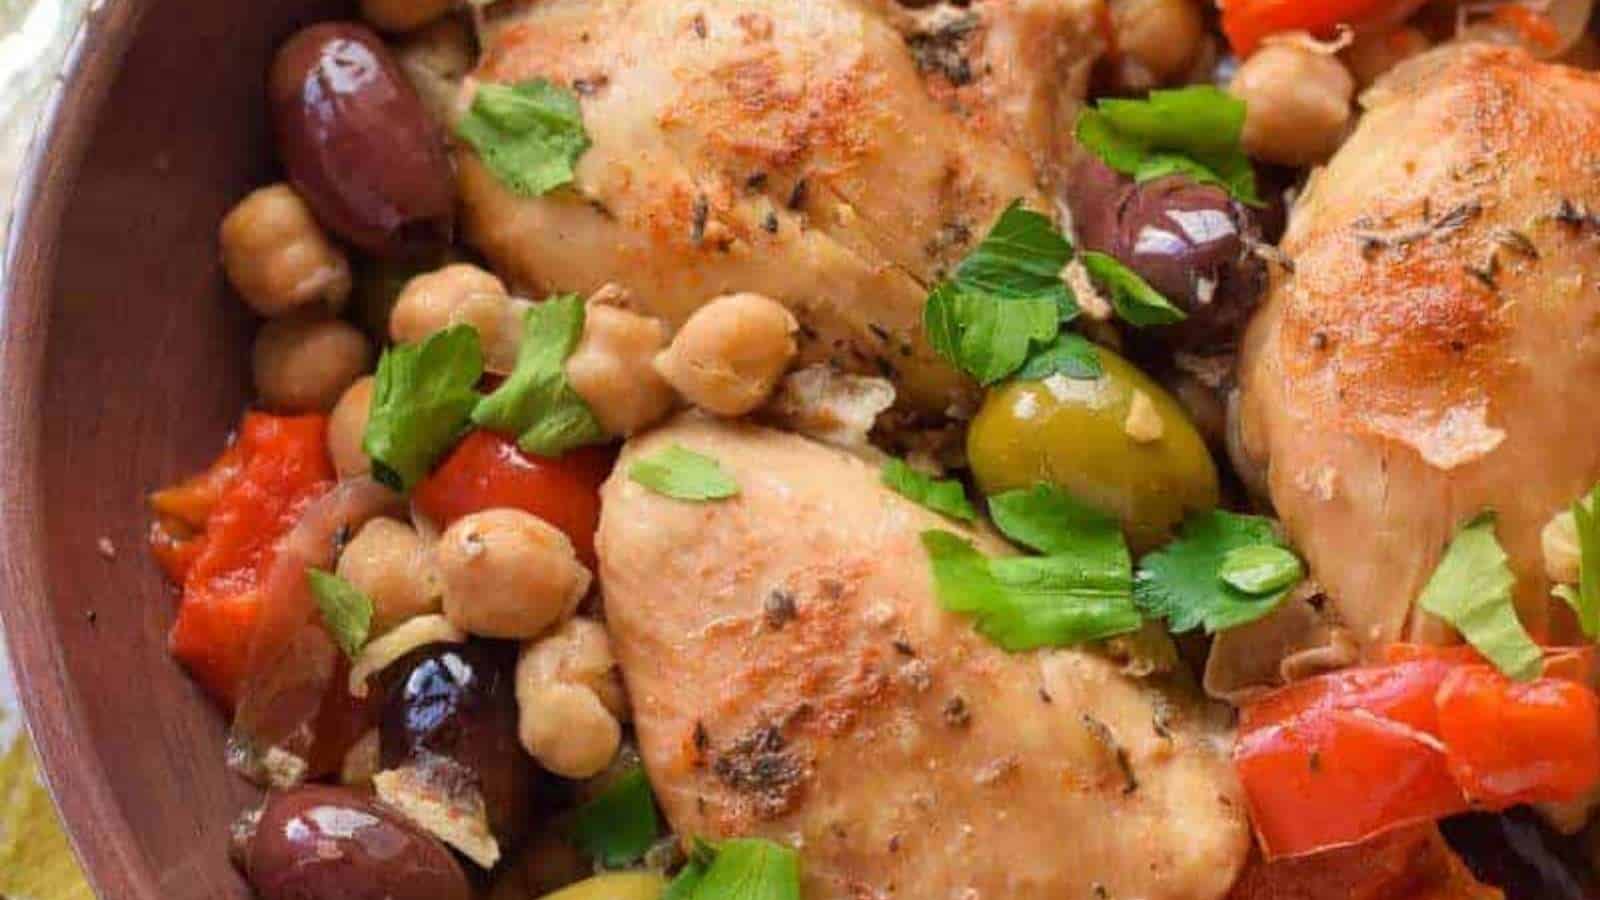 Chicken with chickpeas and tomatoes in a bowl.